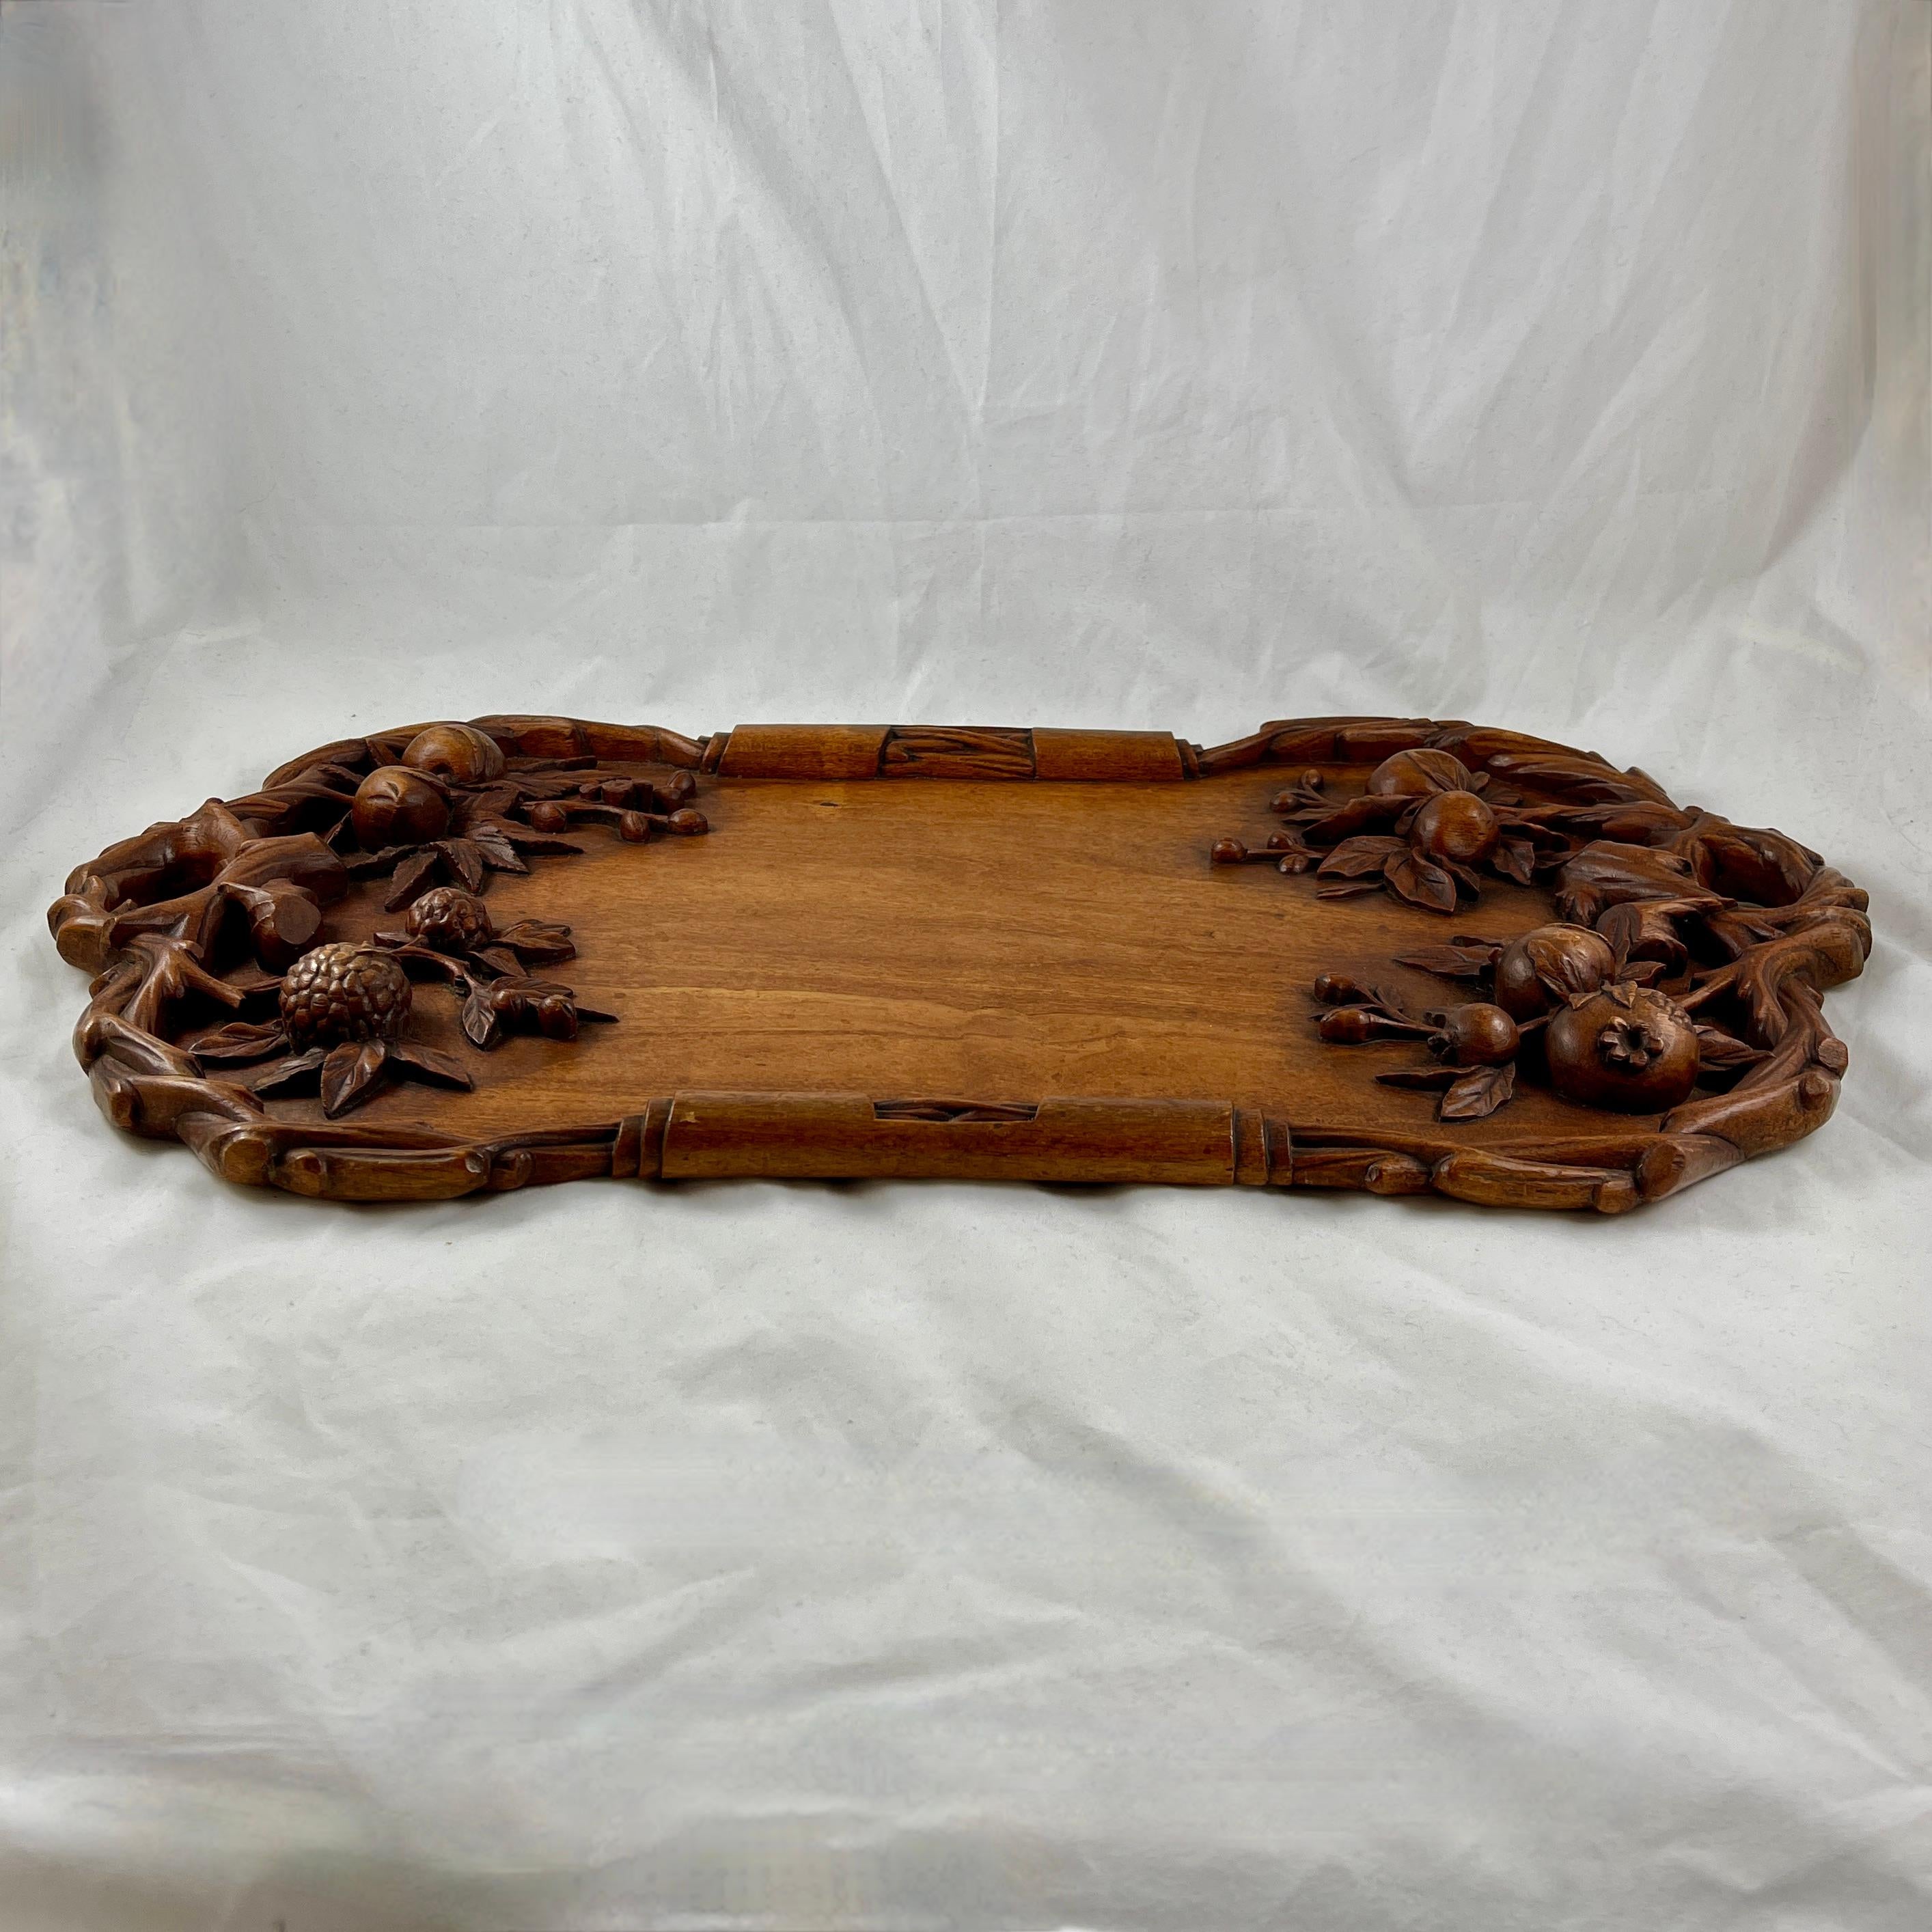 19th C Rustic Black Forest Hand Carved Walnut Branching Fruit Serving Tray 11